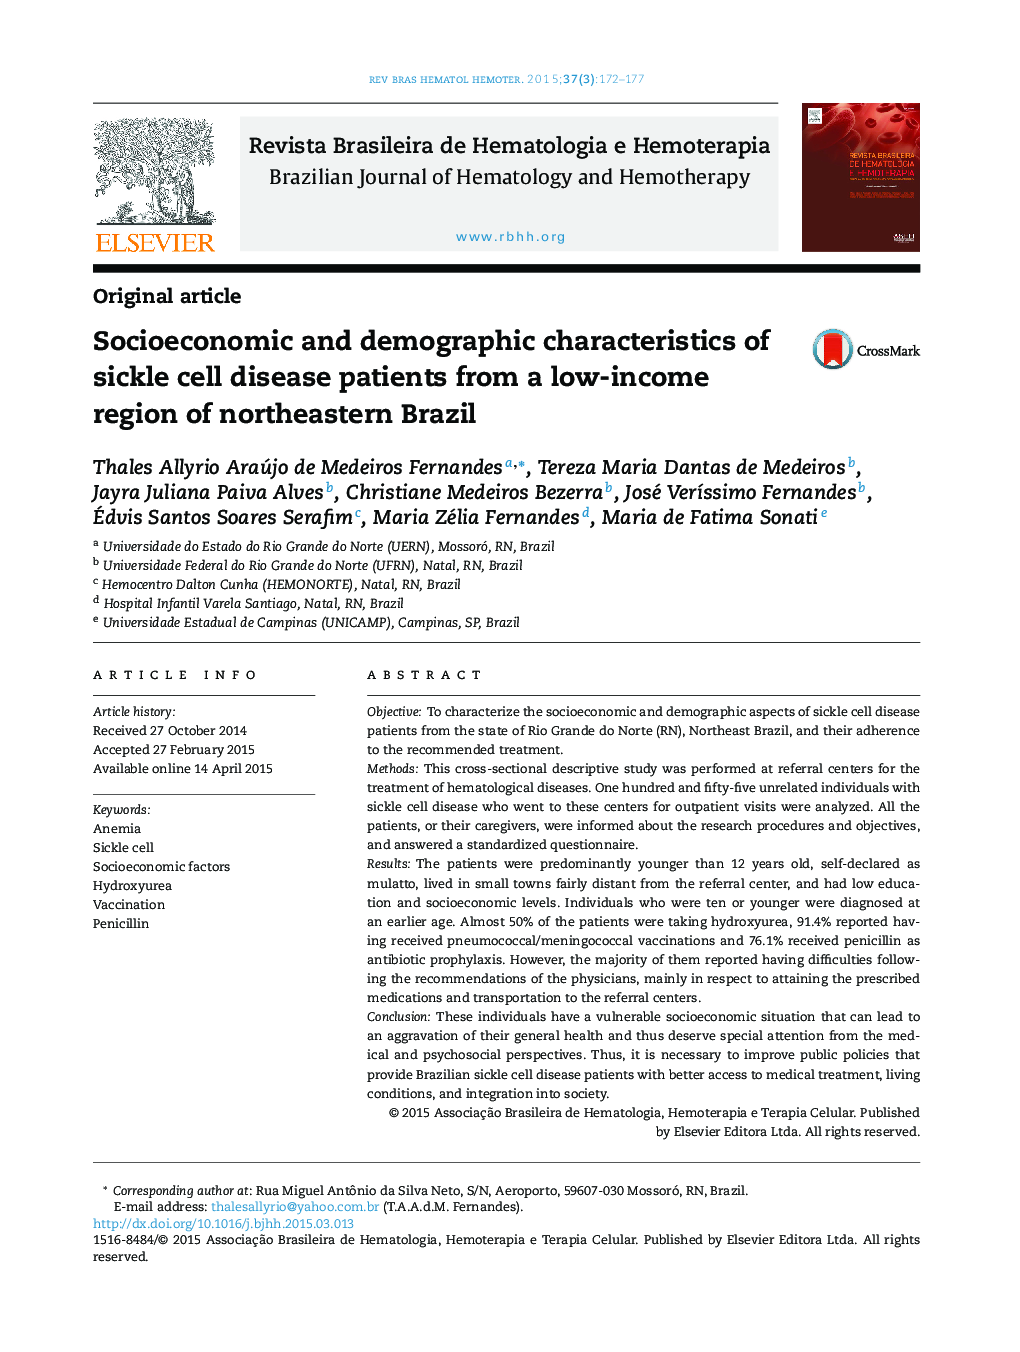 Socioeconomic and demographic characteristics of sickle cell disease patients from a low-income region of northeastern Brazil